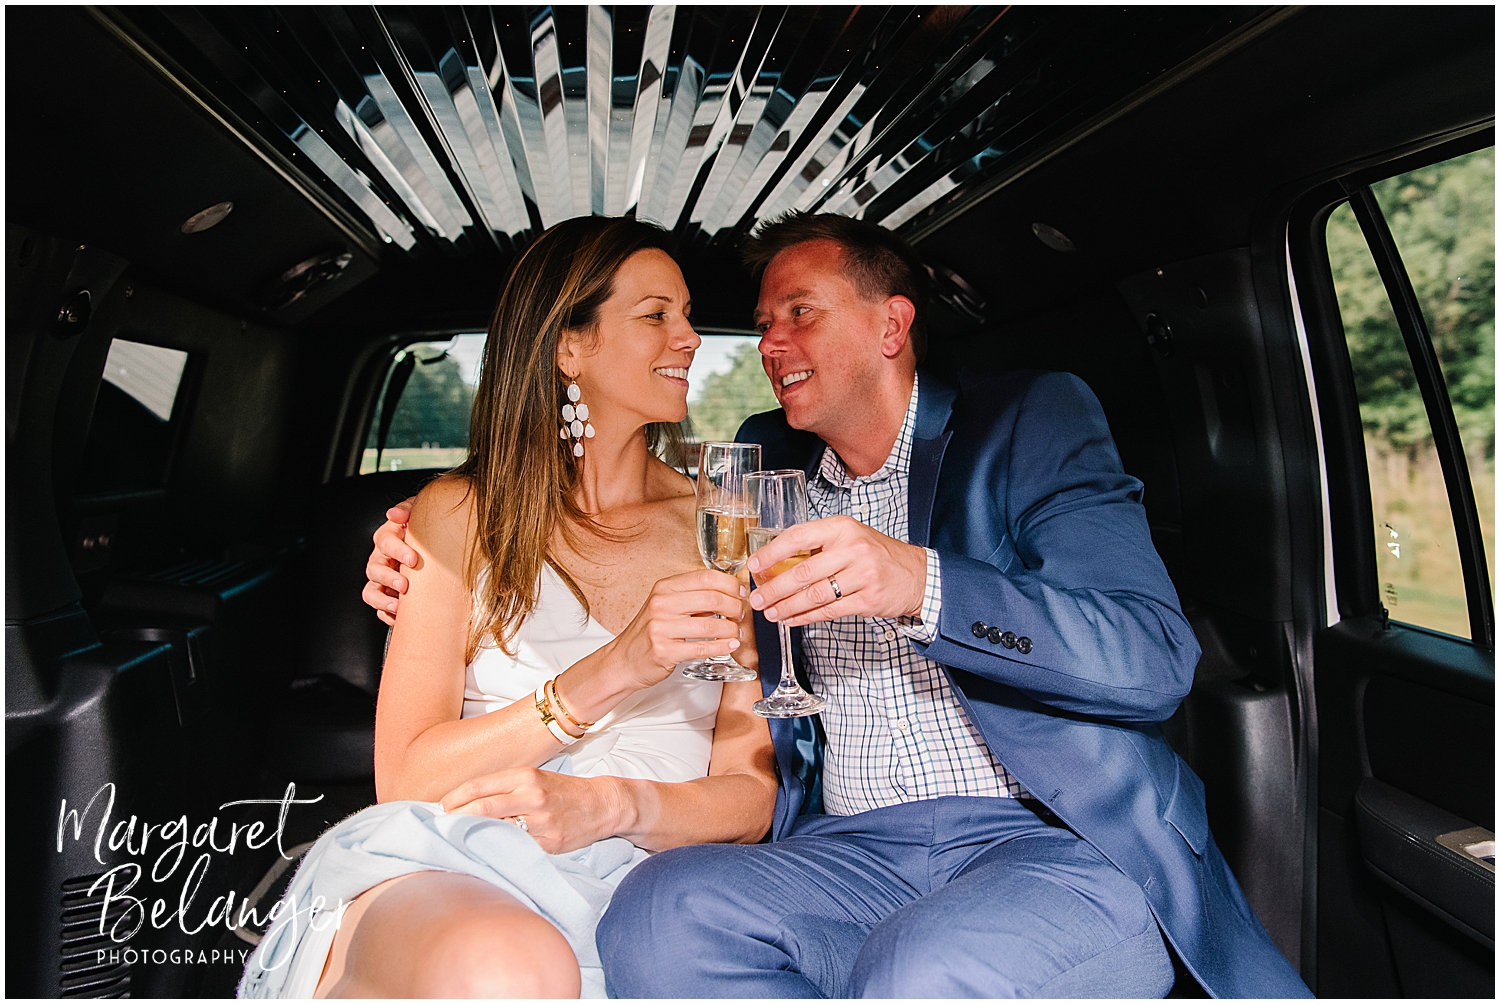 A bride and groom toasting with champagne inside a limousine.